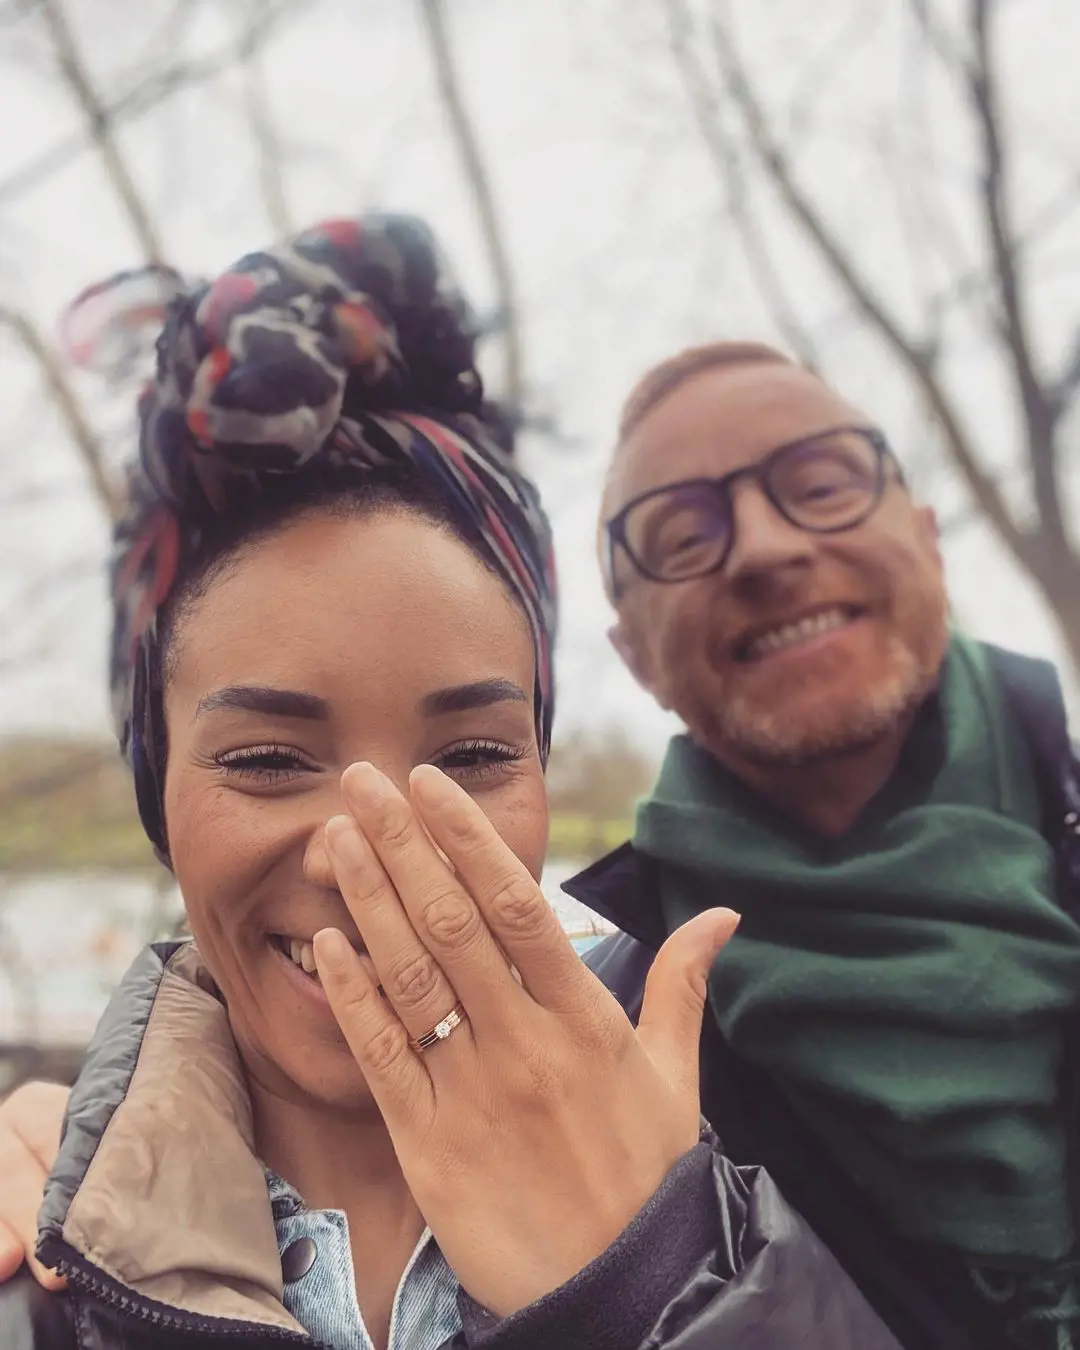 Michelle Ackerley with her partner, Ben Ryan, showing off her engagement ring 